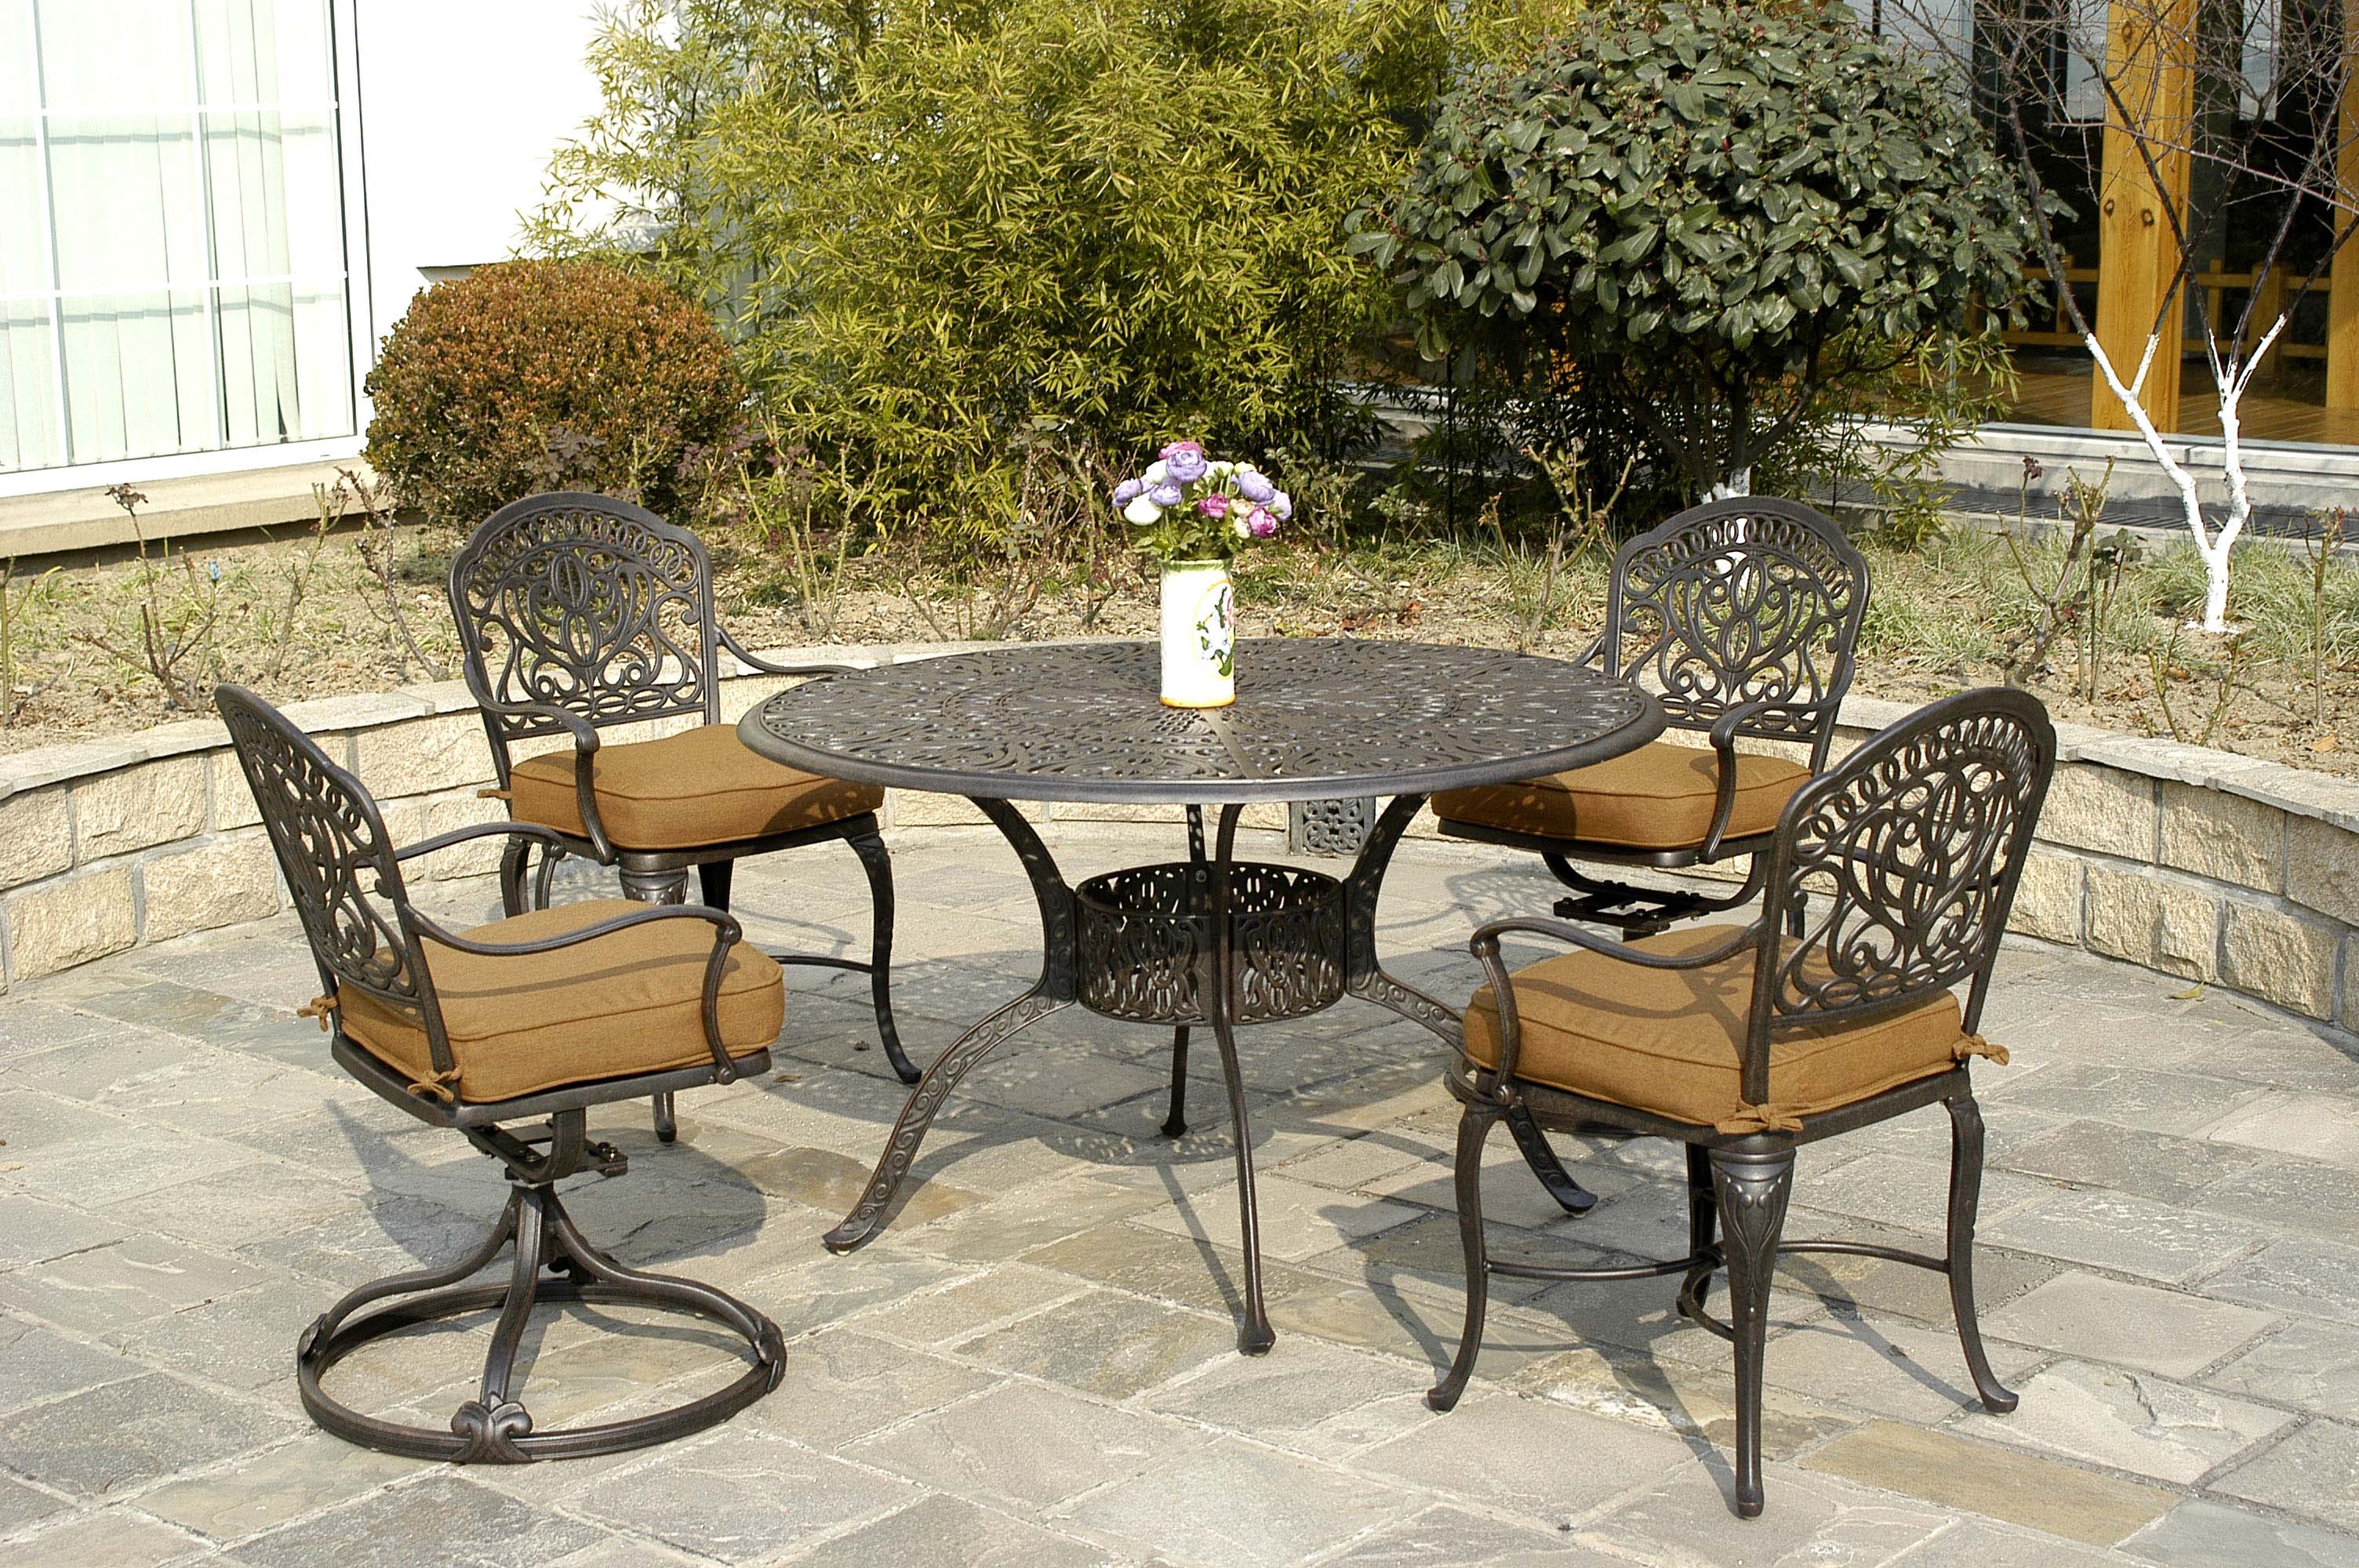 Photo of outdoor patio set - 4 chairs and round table.